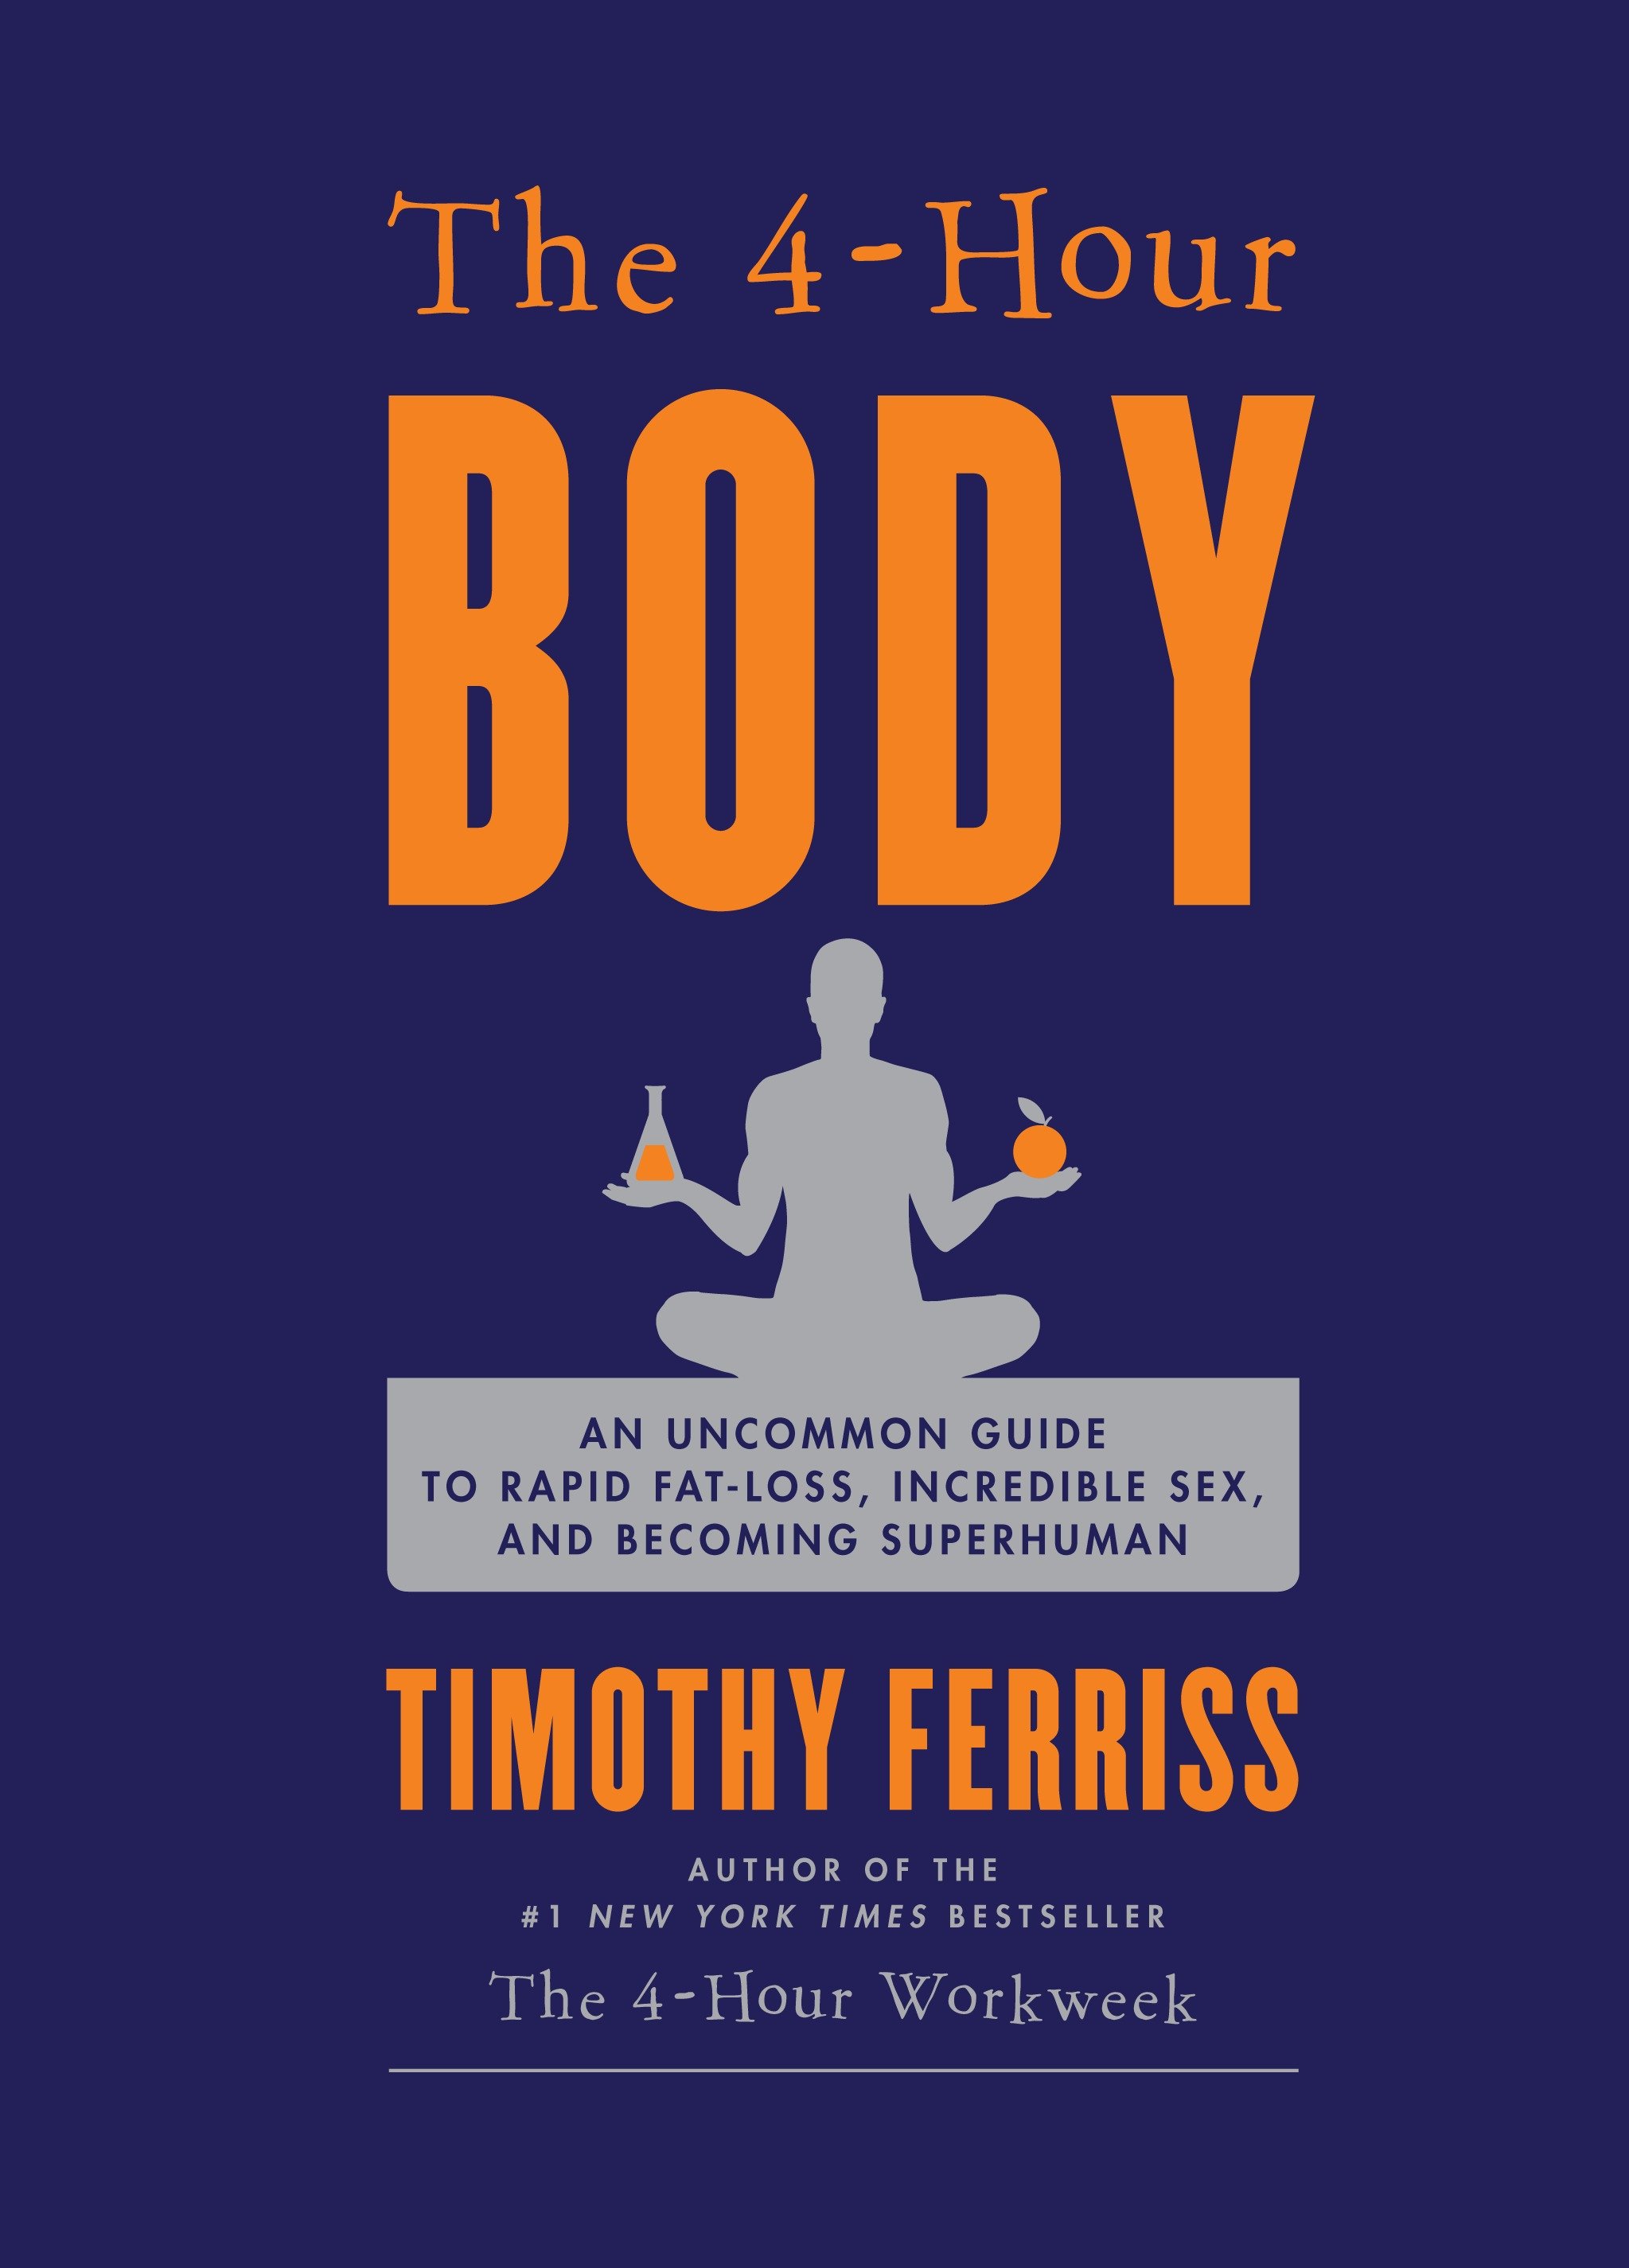 The 4-hour body an uncommon guide to rapid fat-loss, incredible sex, and becoming superhuman cover image